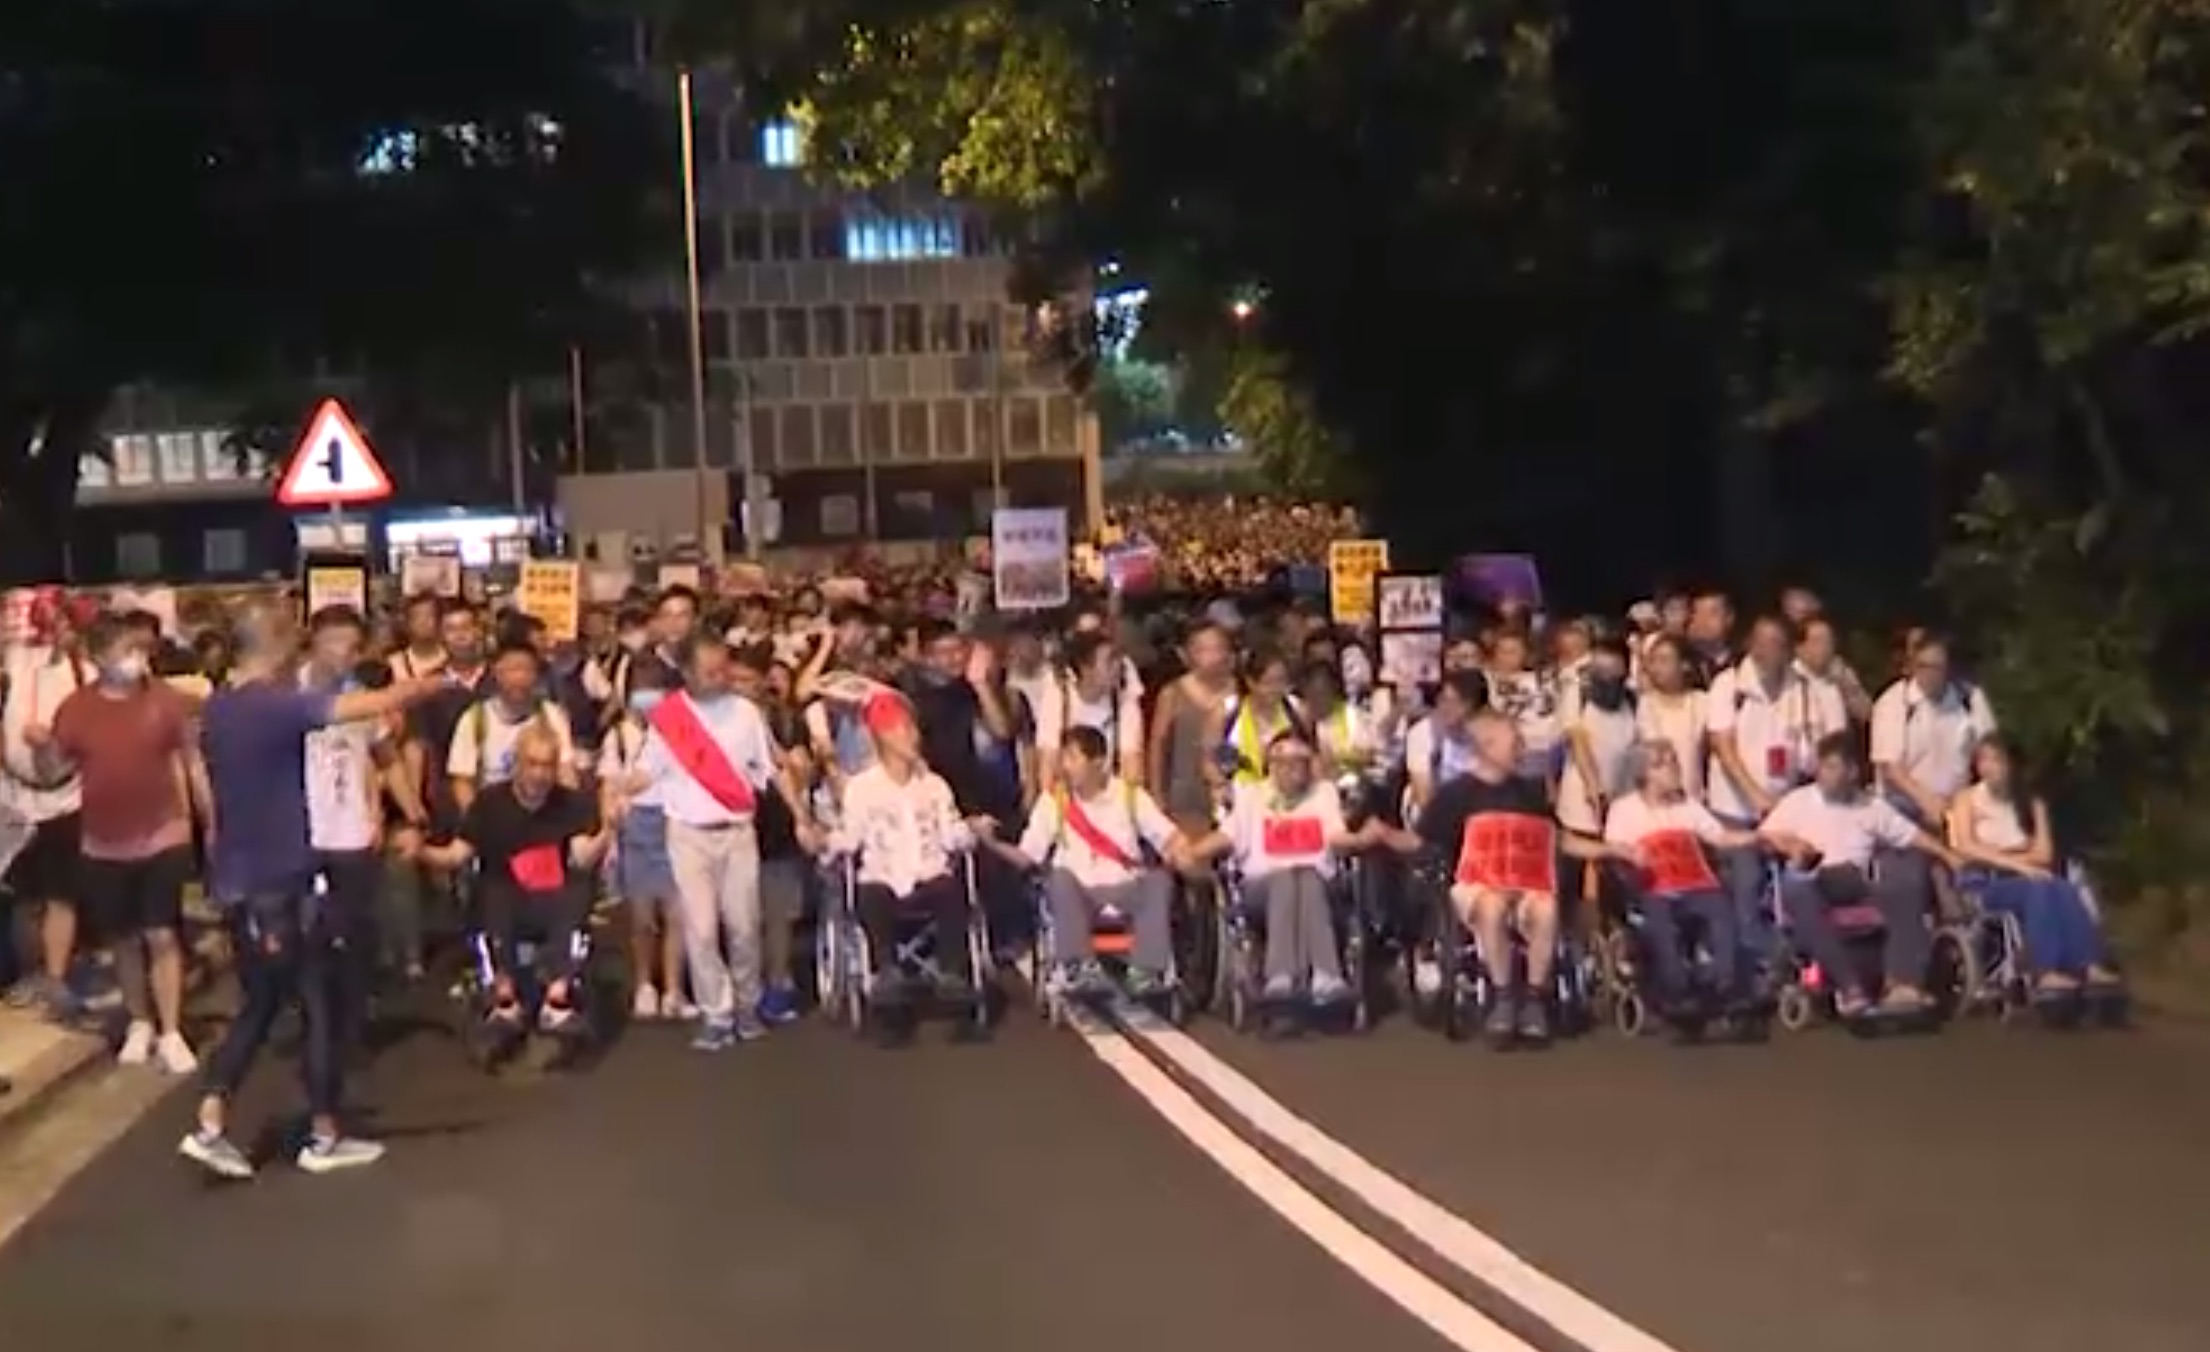 Hunger strikers and other protesters march to the chief executive’s residence last night. Screengrab via RTHK.